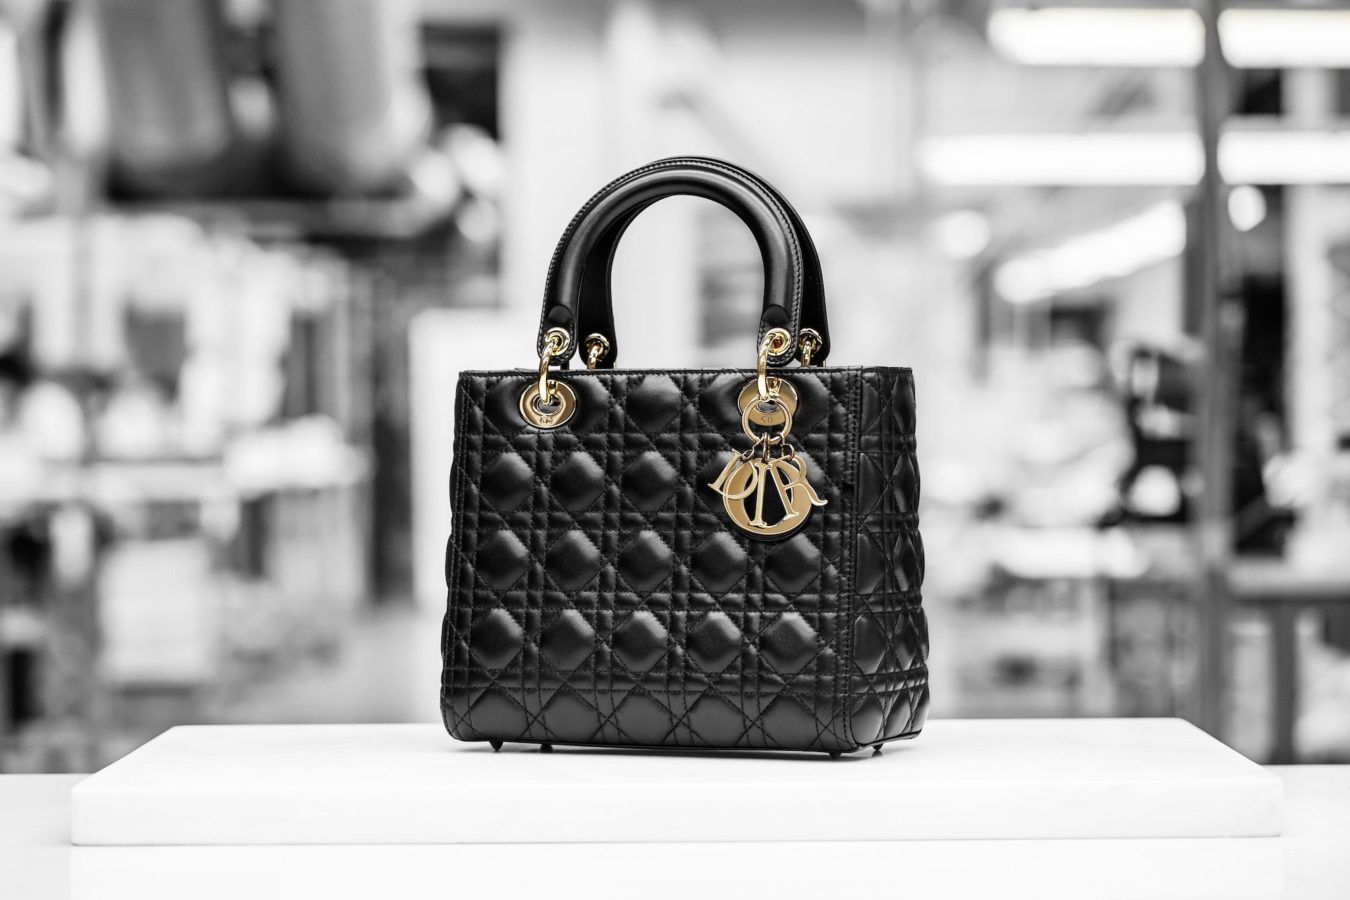 The Story Behind Lady Diana'S Favourite Iconic Handbag, Lady Dior